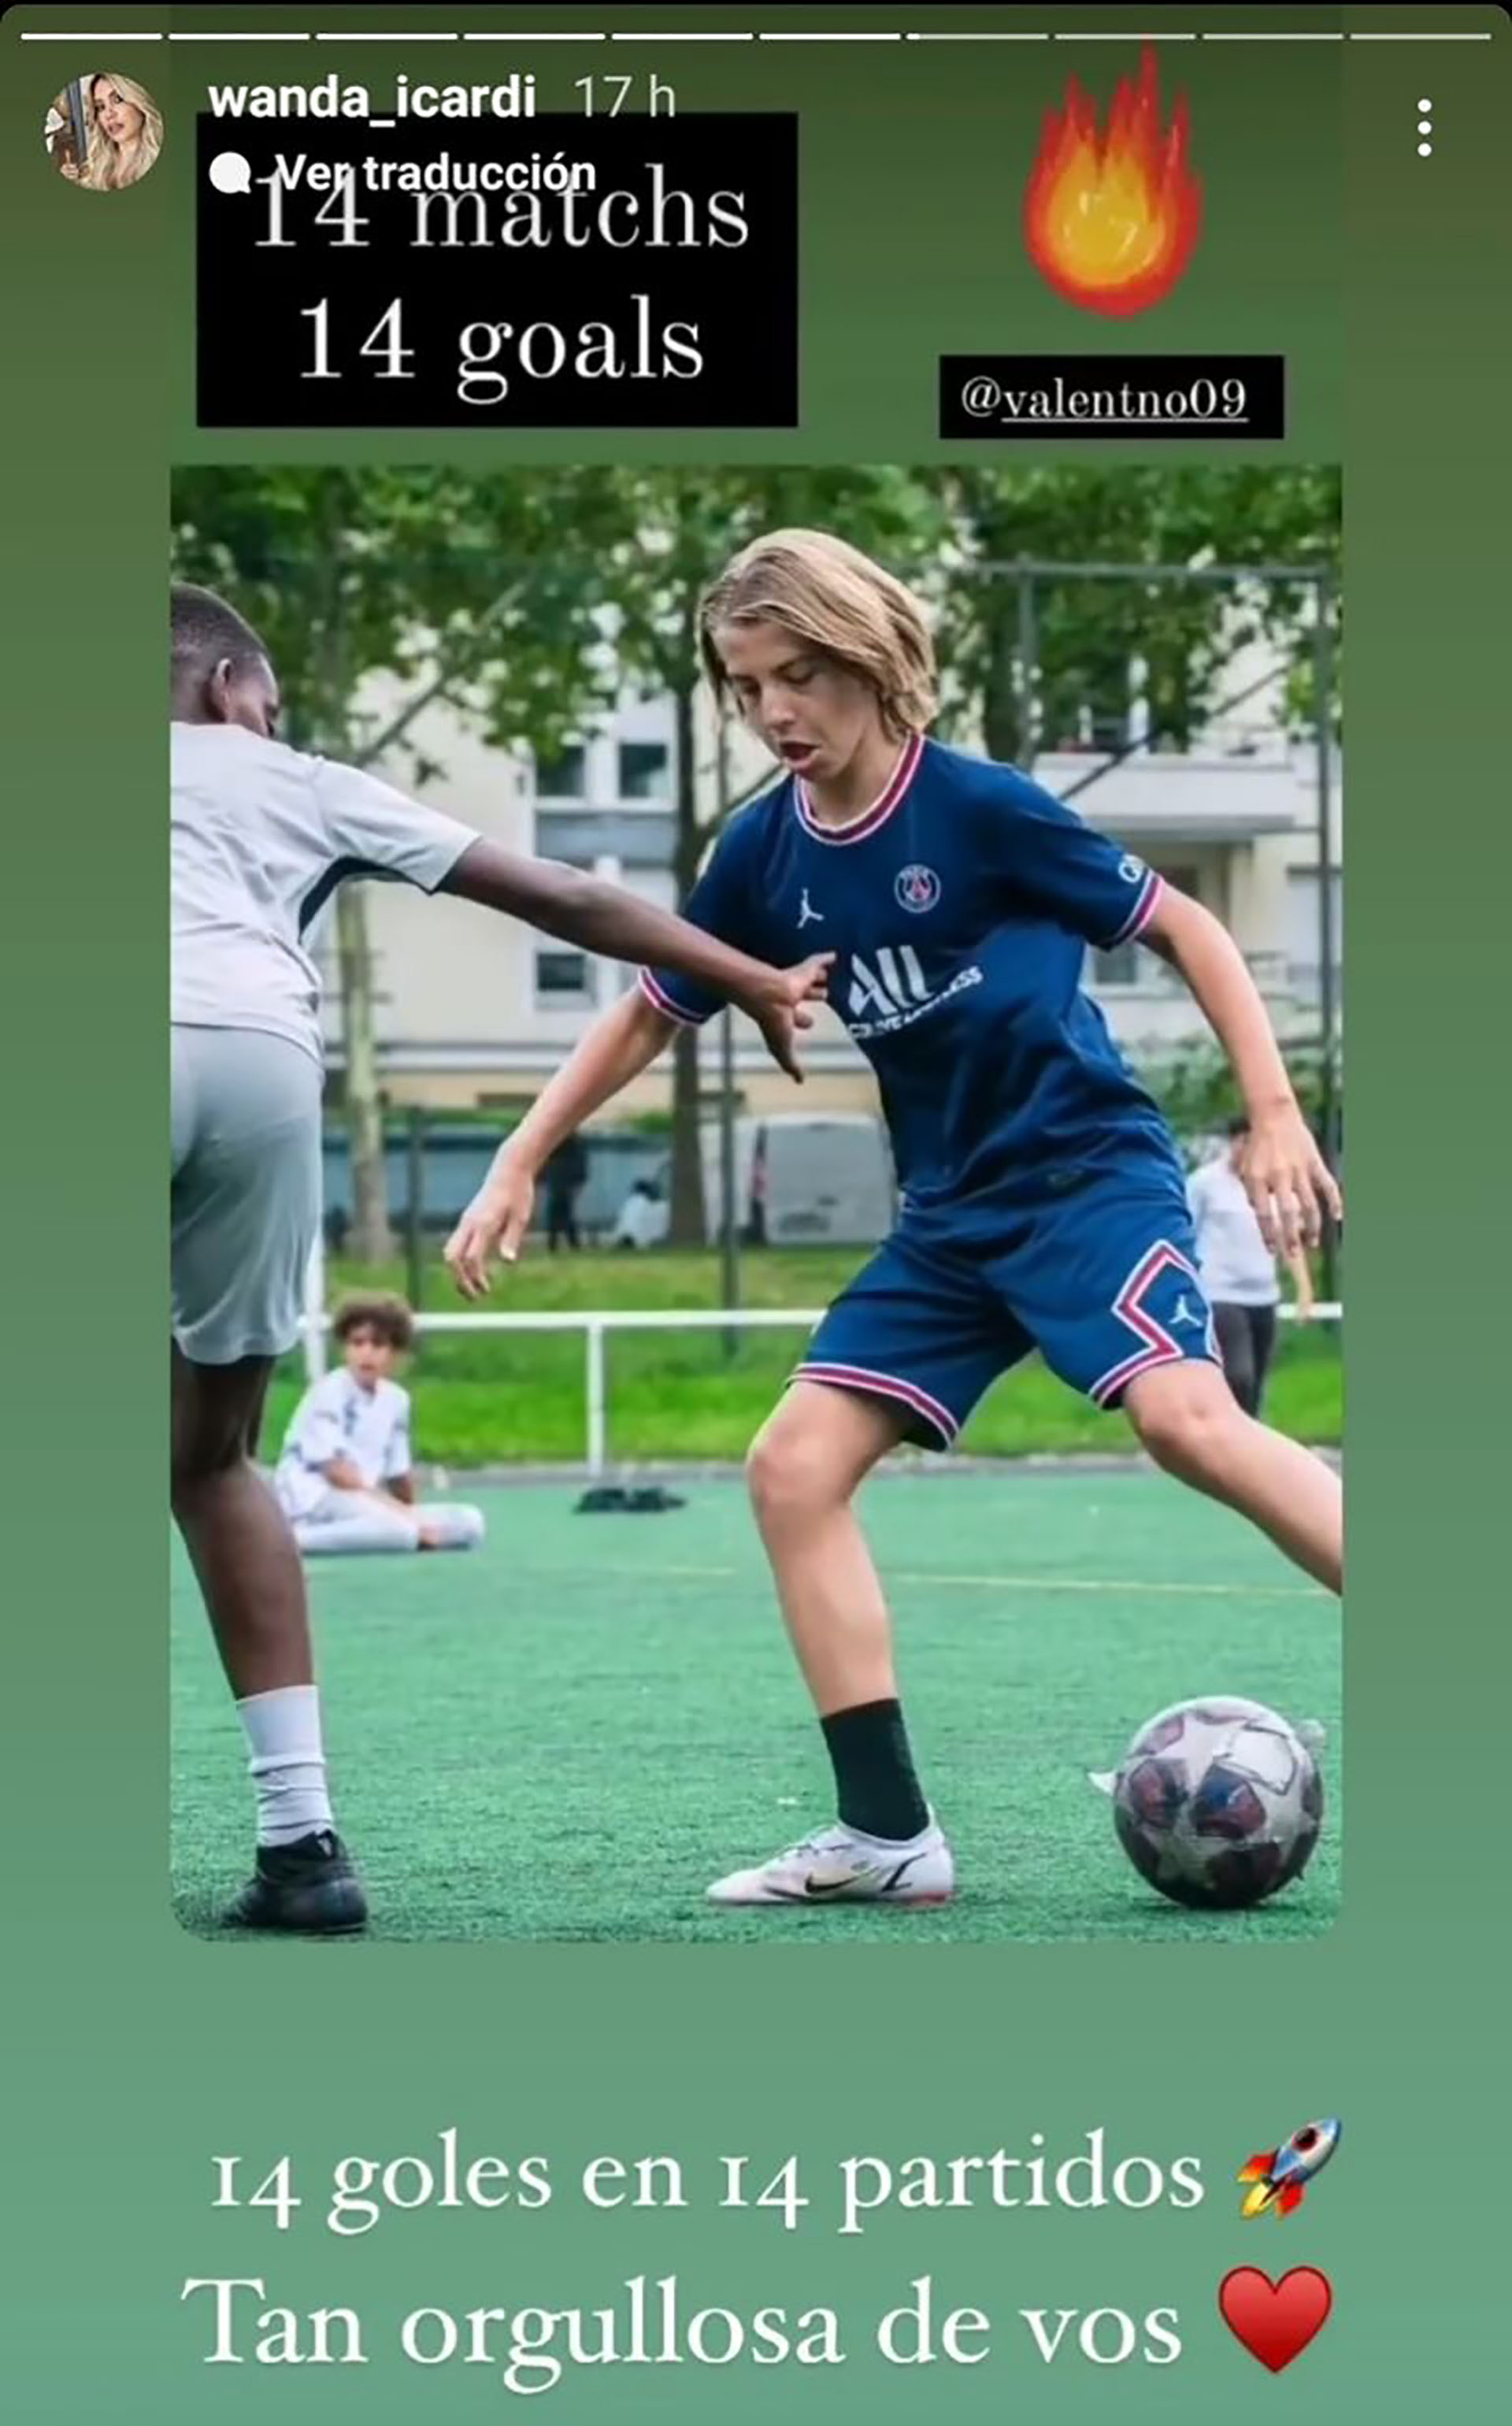 The impressive mark that the eldest son of Maxi Lopez and Wanda Nara reached on PSG U13 his best plays - Infobae